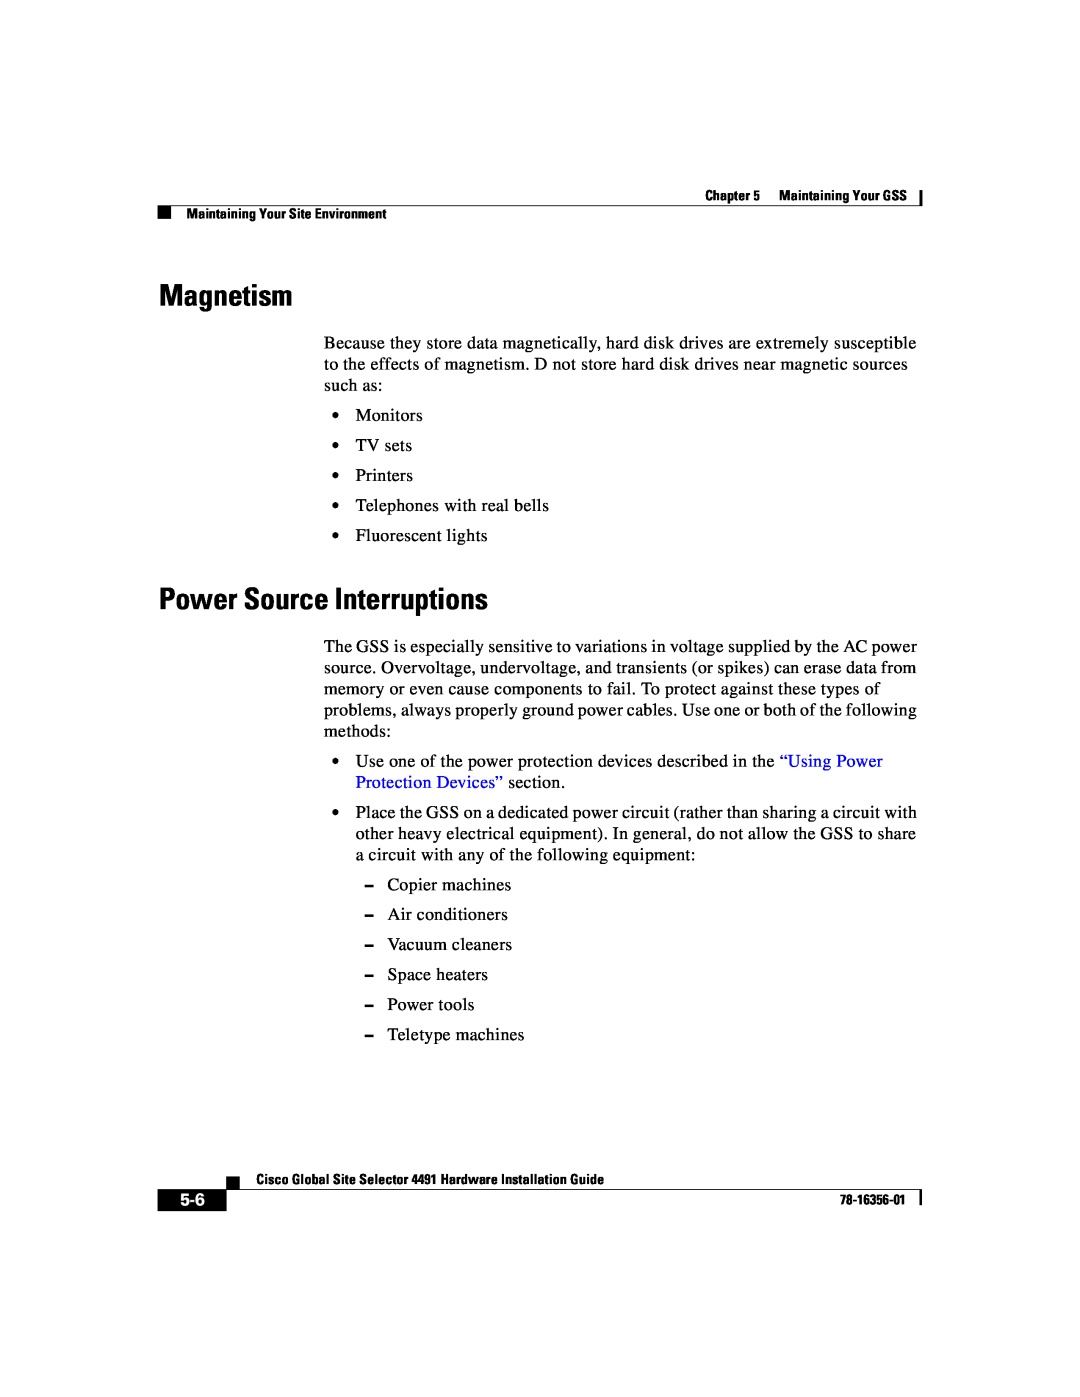 Cisco Systems 78-16356-01 manual Magnetism, Power Source Interruptions 